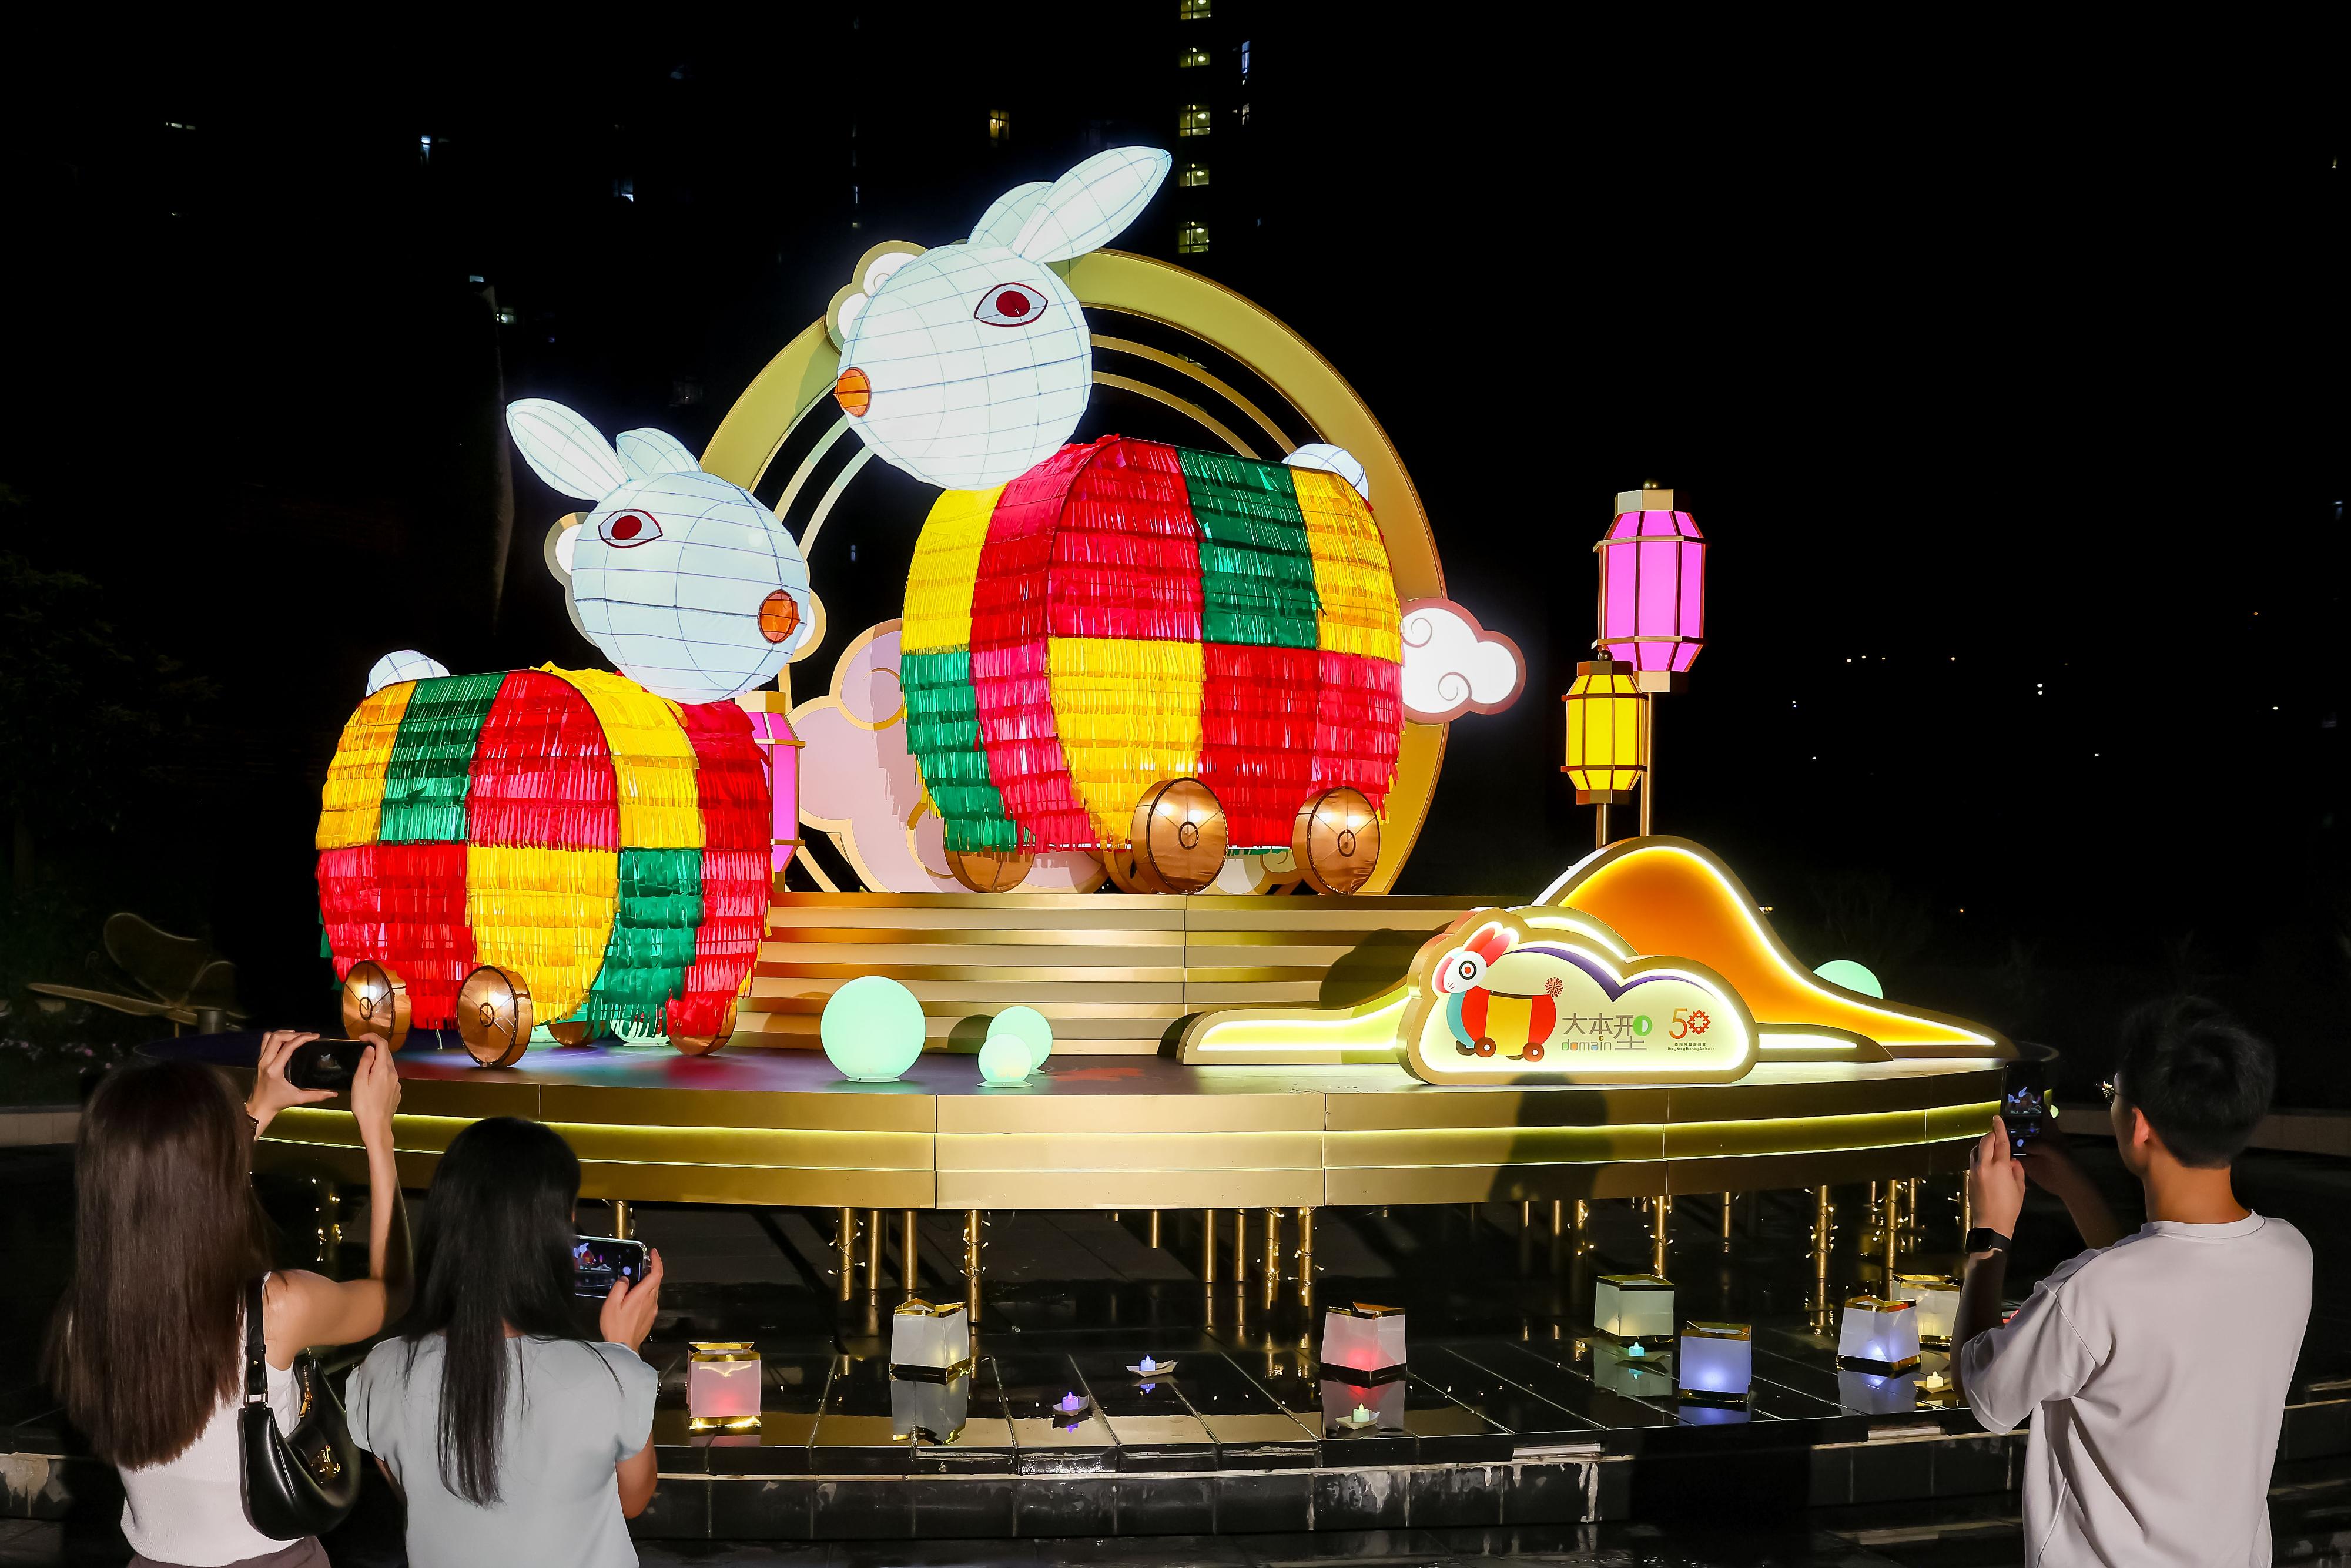 Hong Kong Housing Authority (HA) shopping centres are joining the Night Vibes Hong Kong campaign to hold promotion activities for celebration of the Mid-Autumn Festival and National Day. Photo shows two giant rabbit lanterns at the roof garden at Domain, the HA's flagship shopping centre in Yau Tong, East Kowloon.